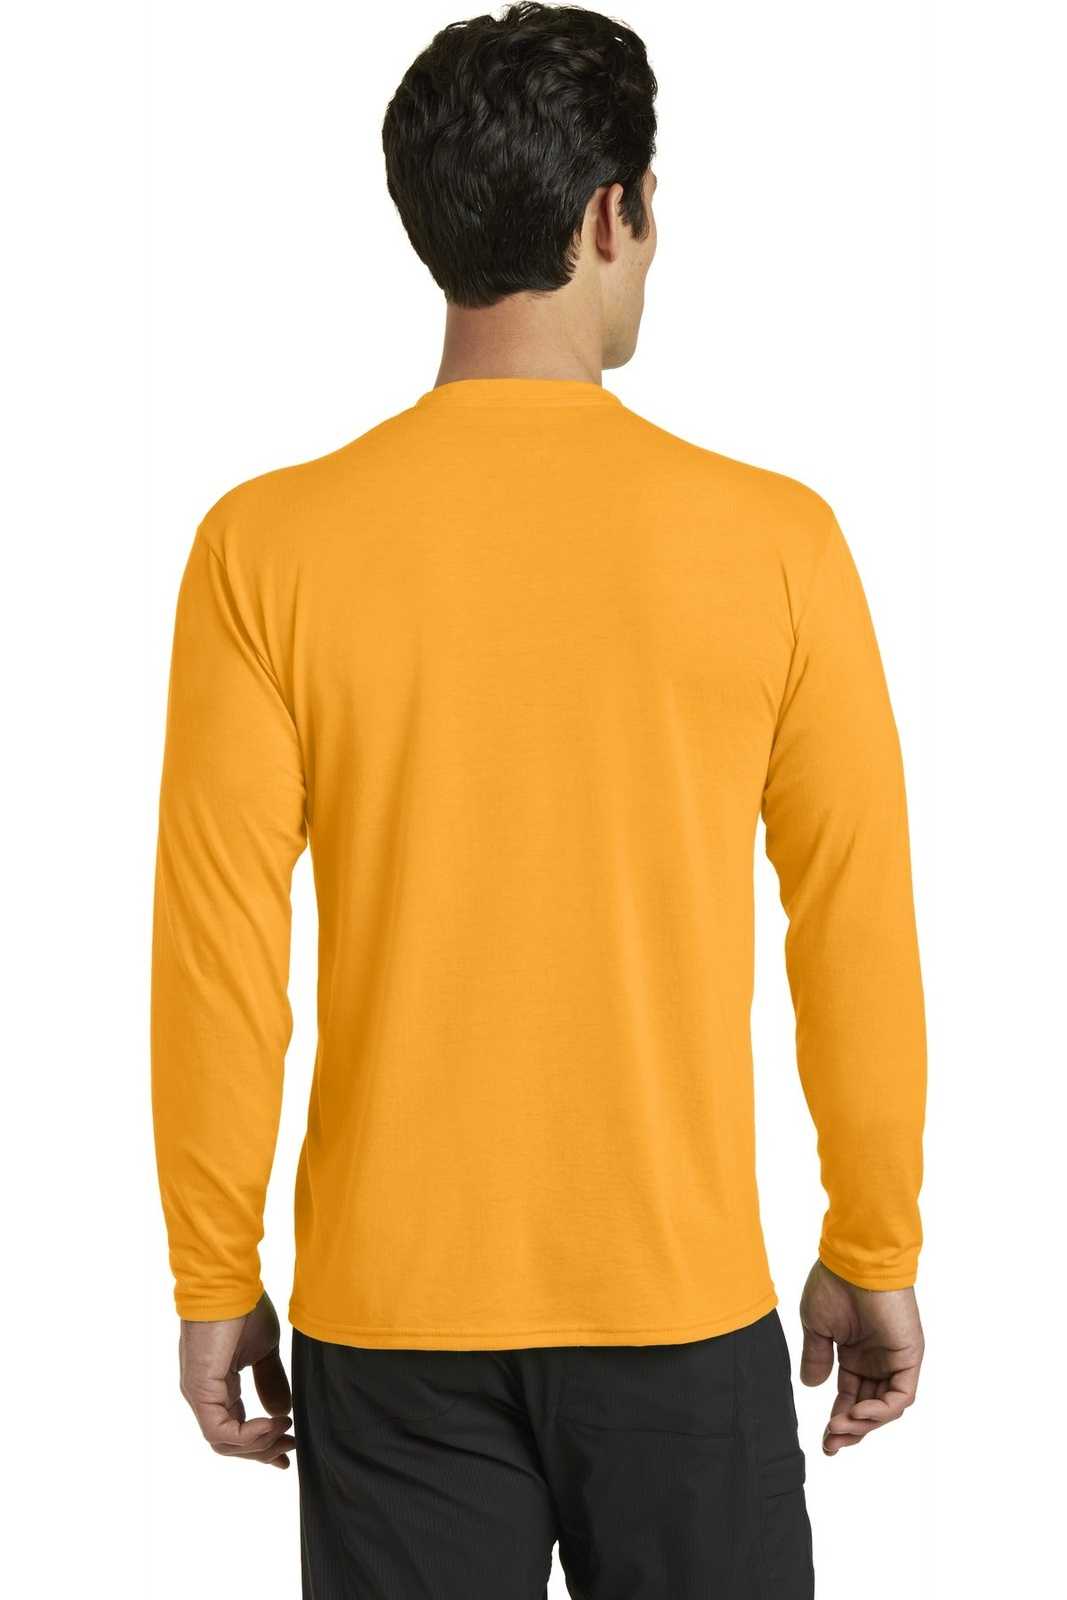 Port &amp; Company PC381LS Long Sleeve Performance Blend Tee - Gold - HIT a Double - 2